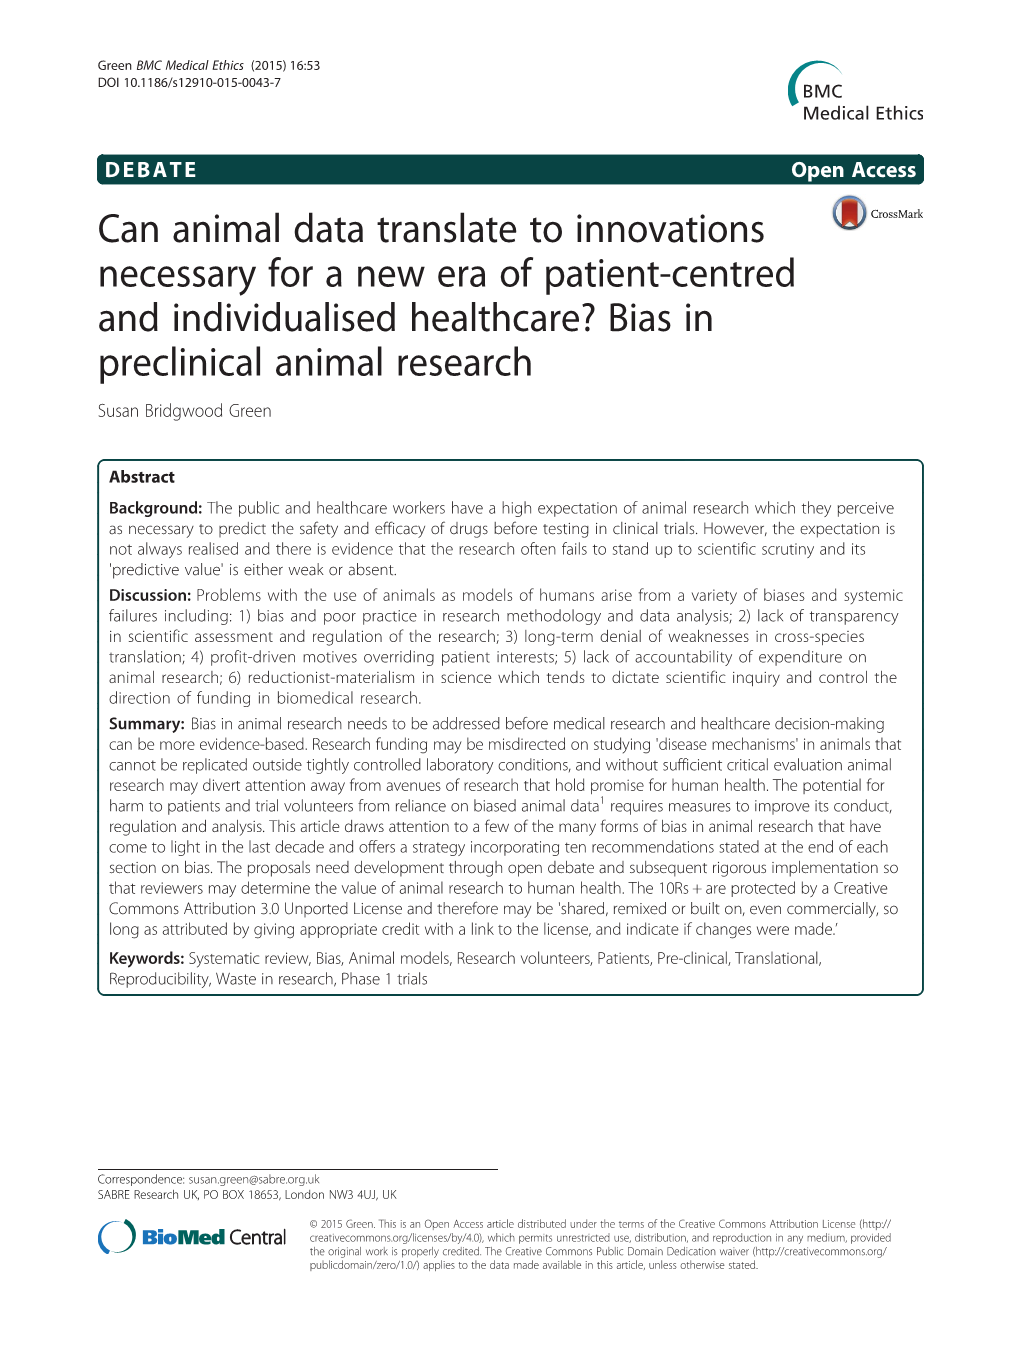 Can Animal Data Translate to Innovations Necessary for a New